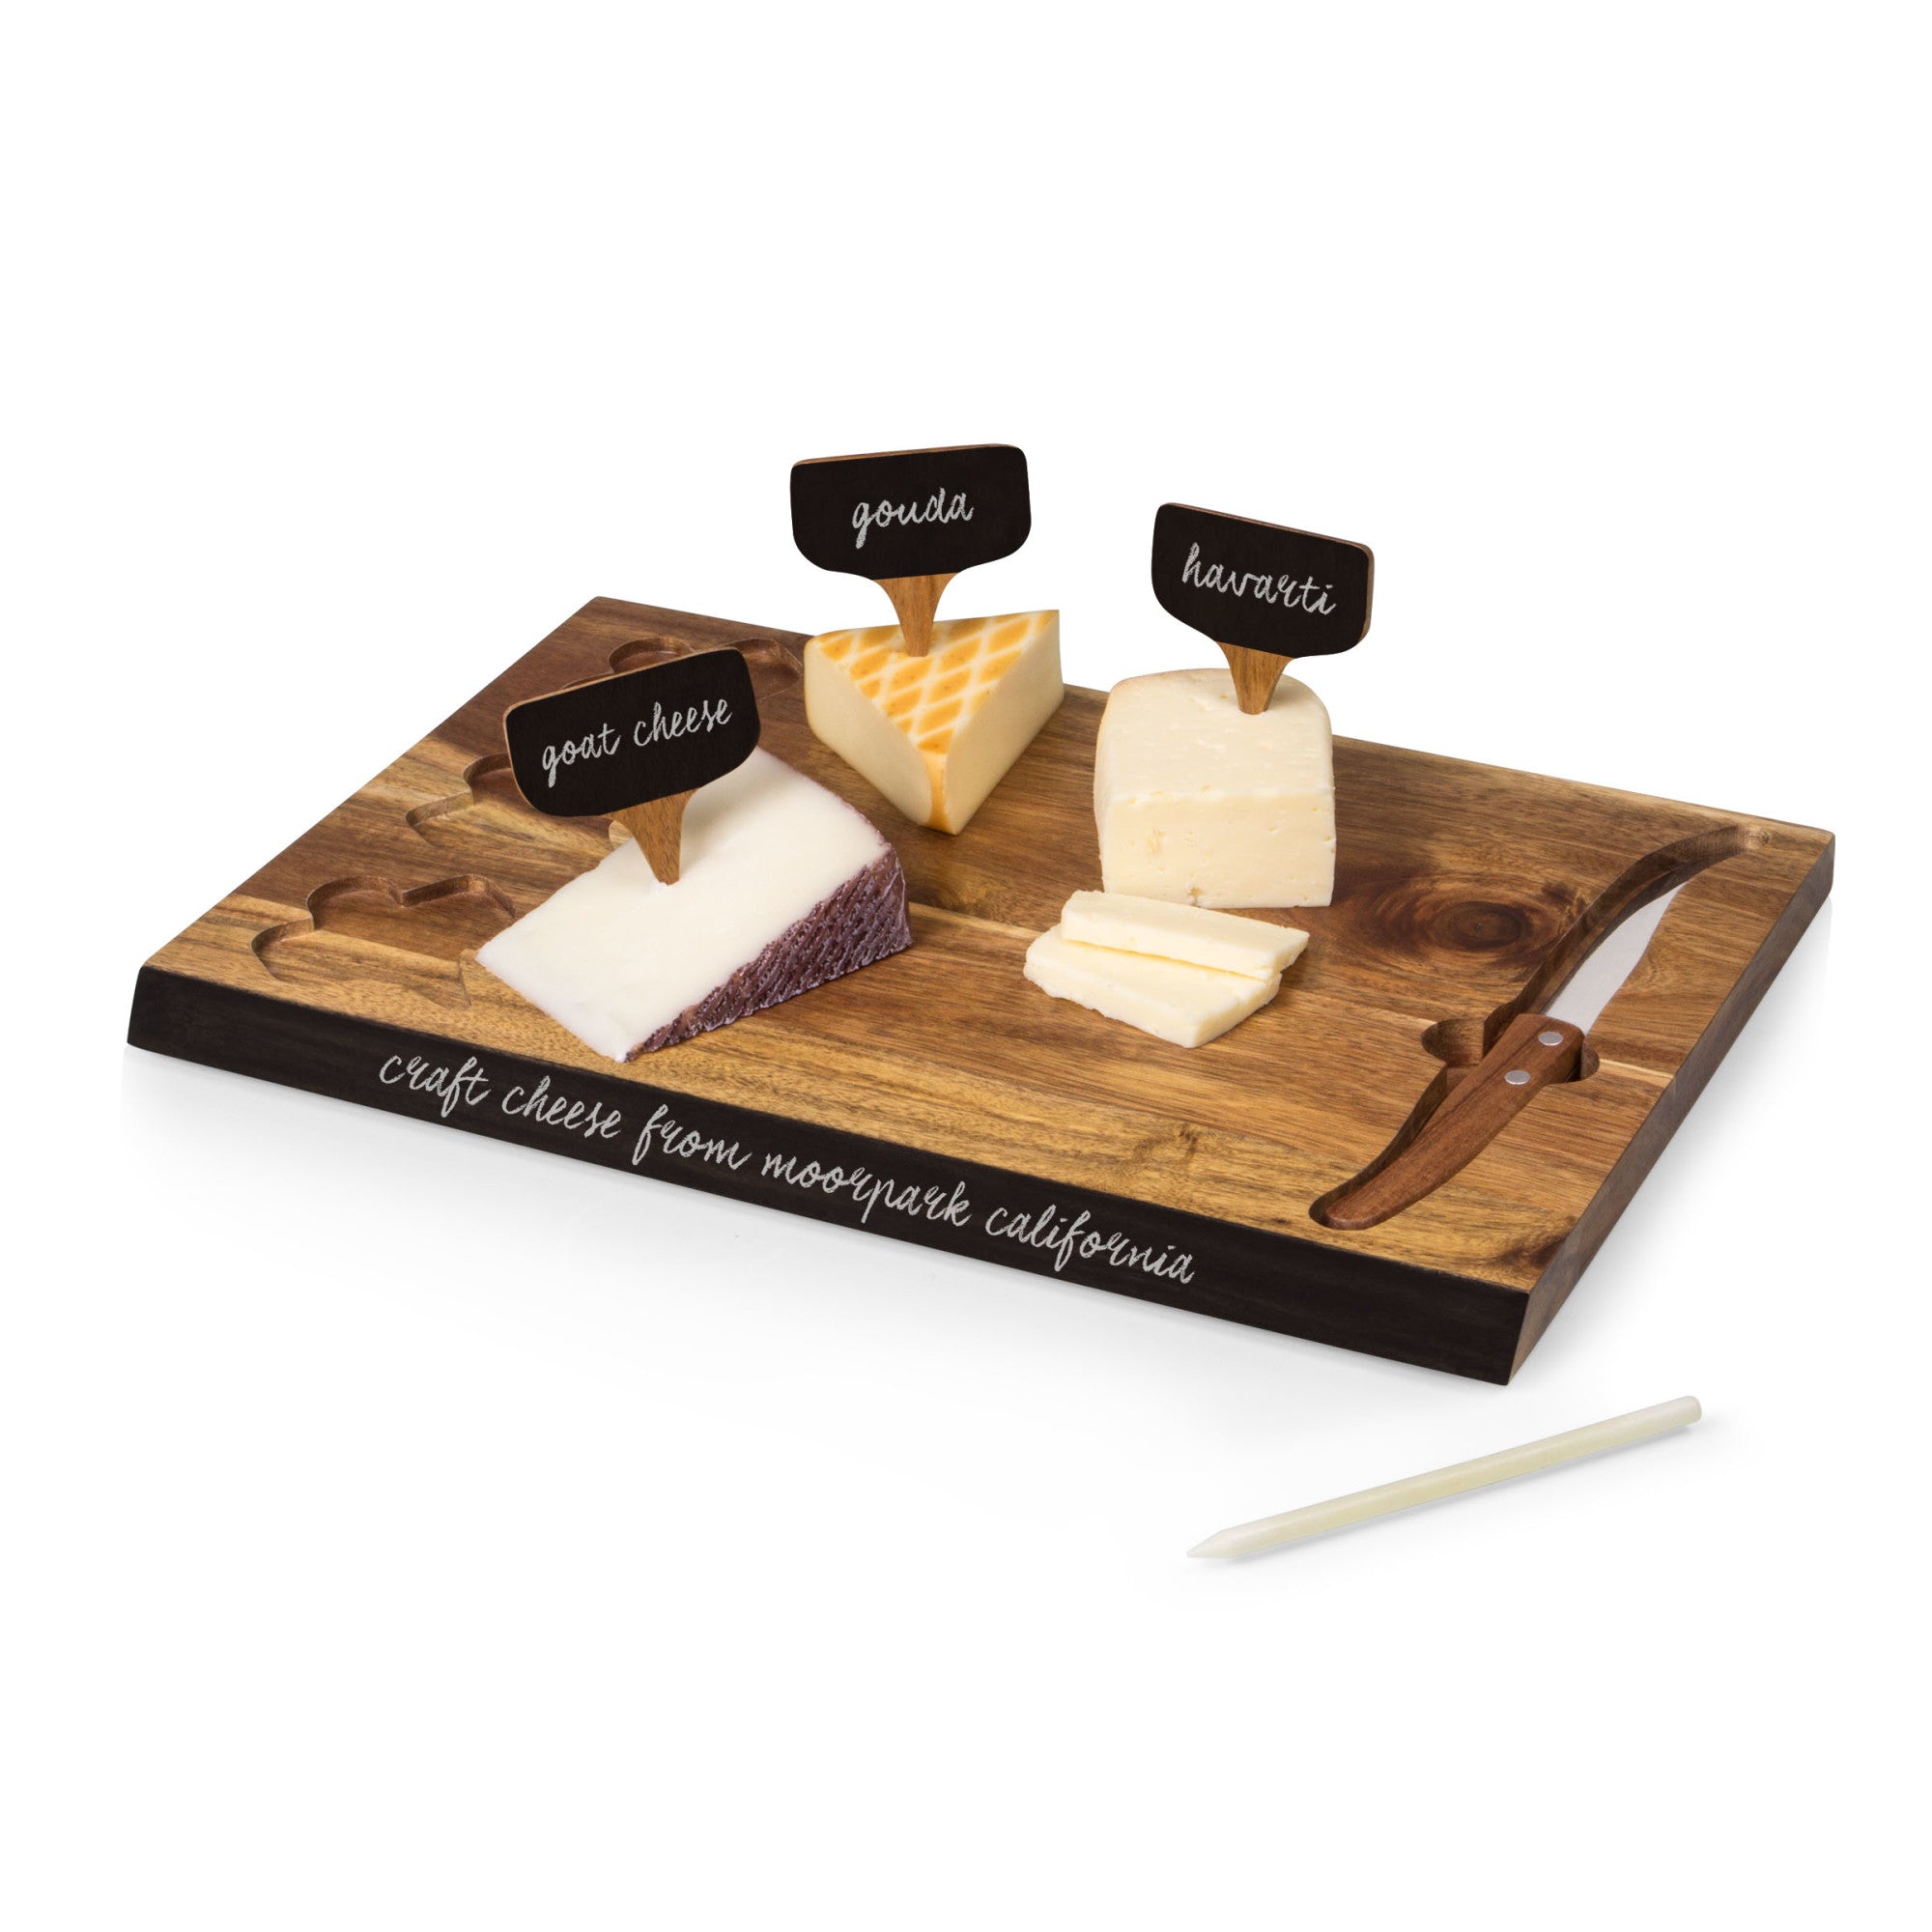 Pittsburgh Panthers - Delio Acacia Cheese Cutting Board & Tools Set